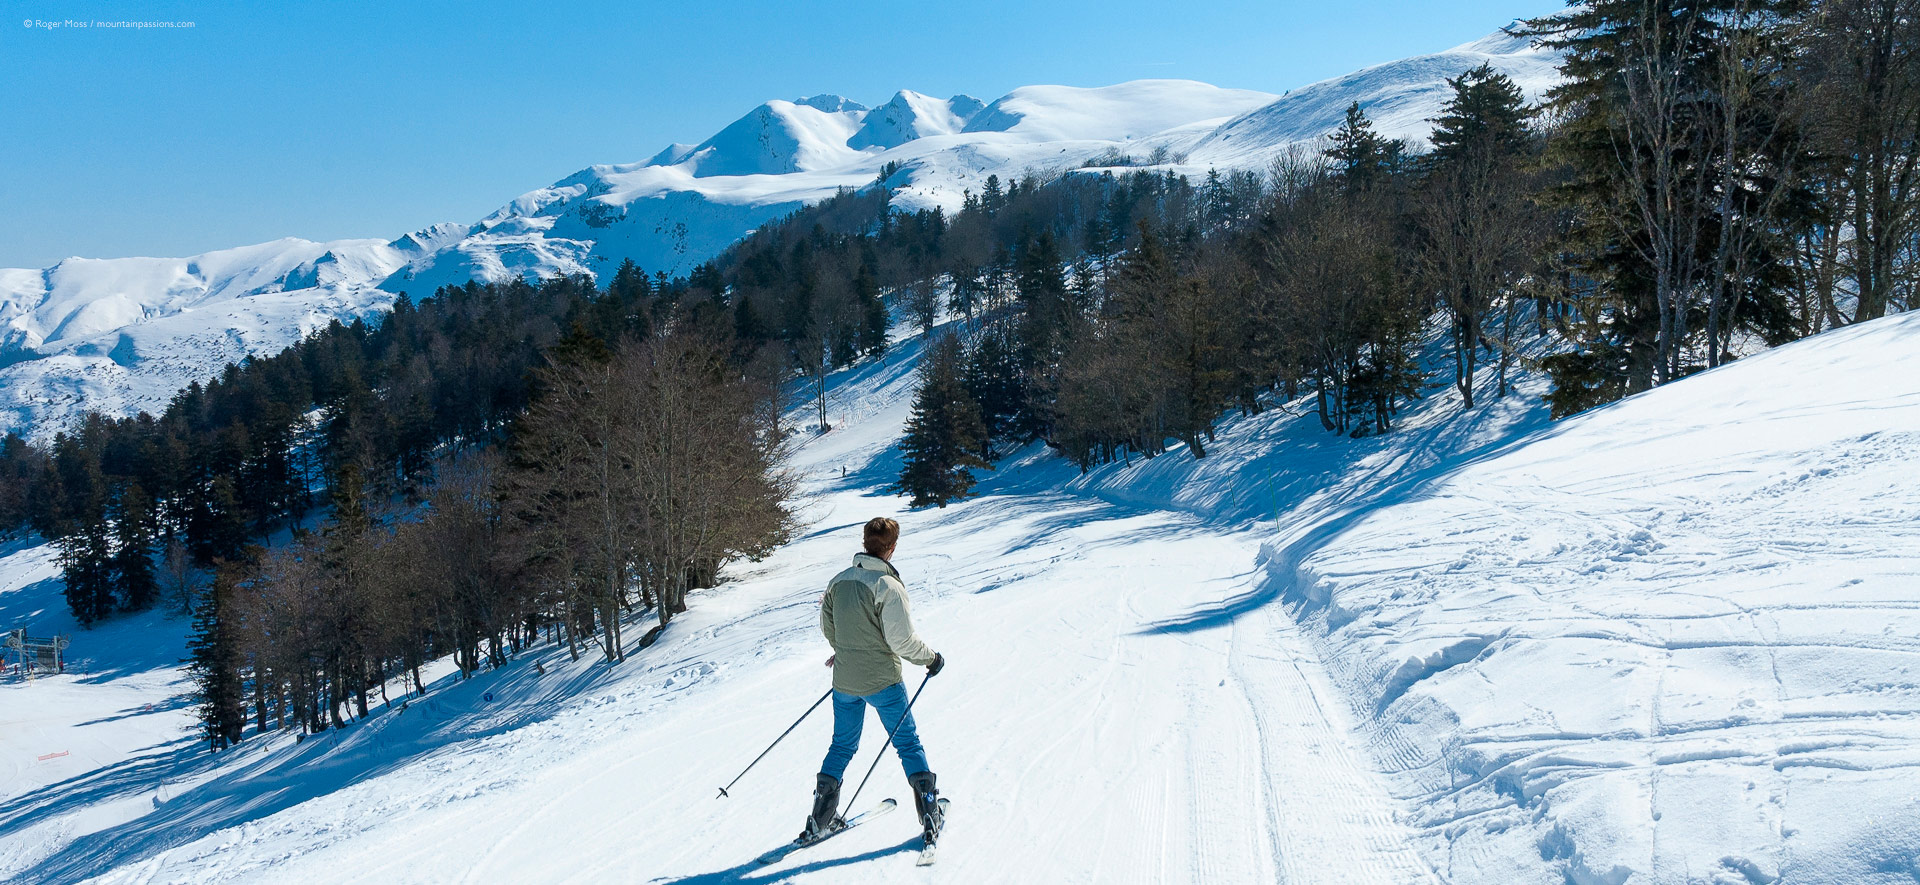 Young skier among unspoilt mountain scenery with pine trees